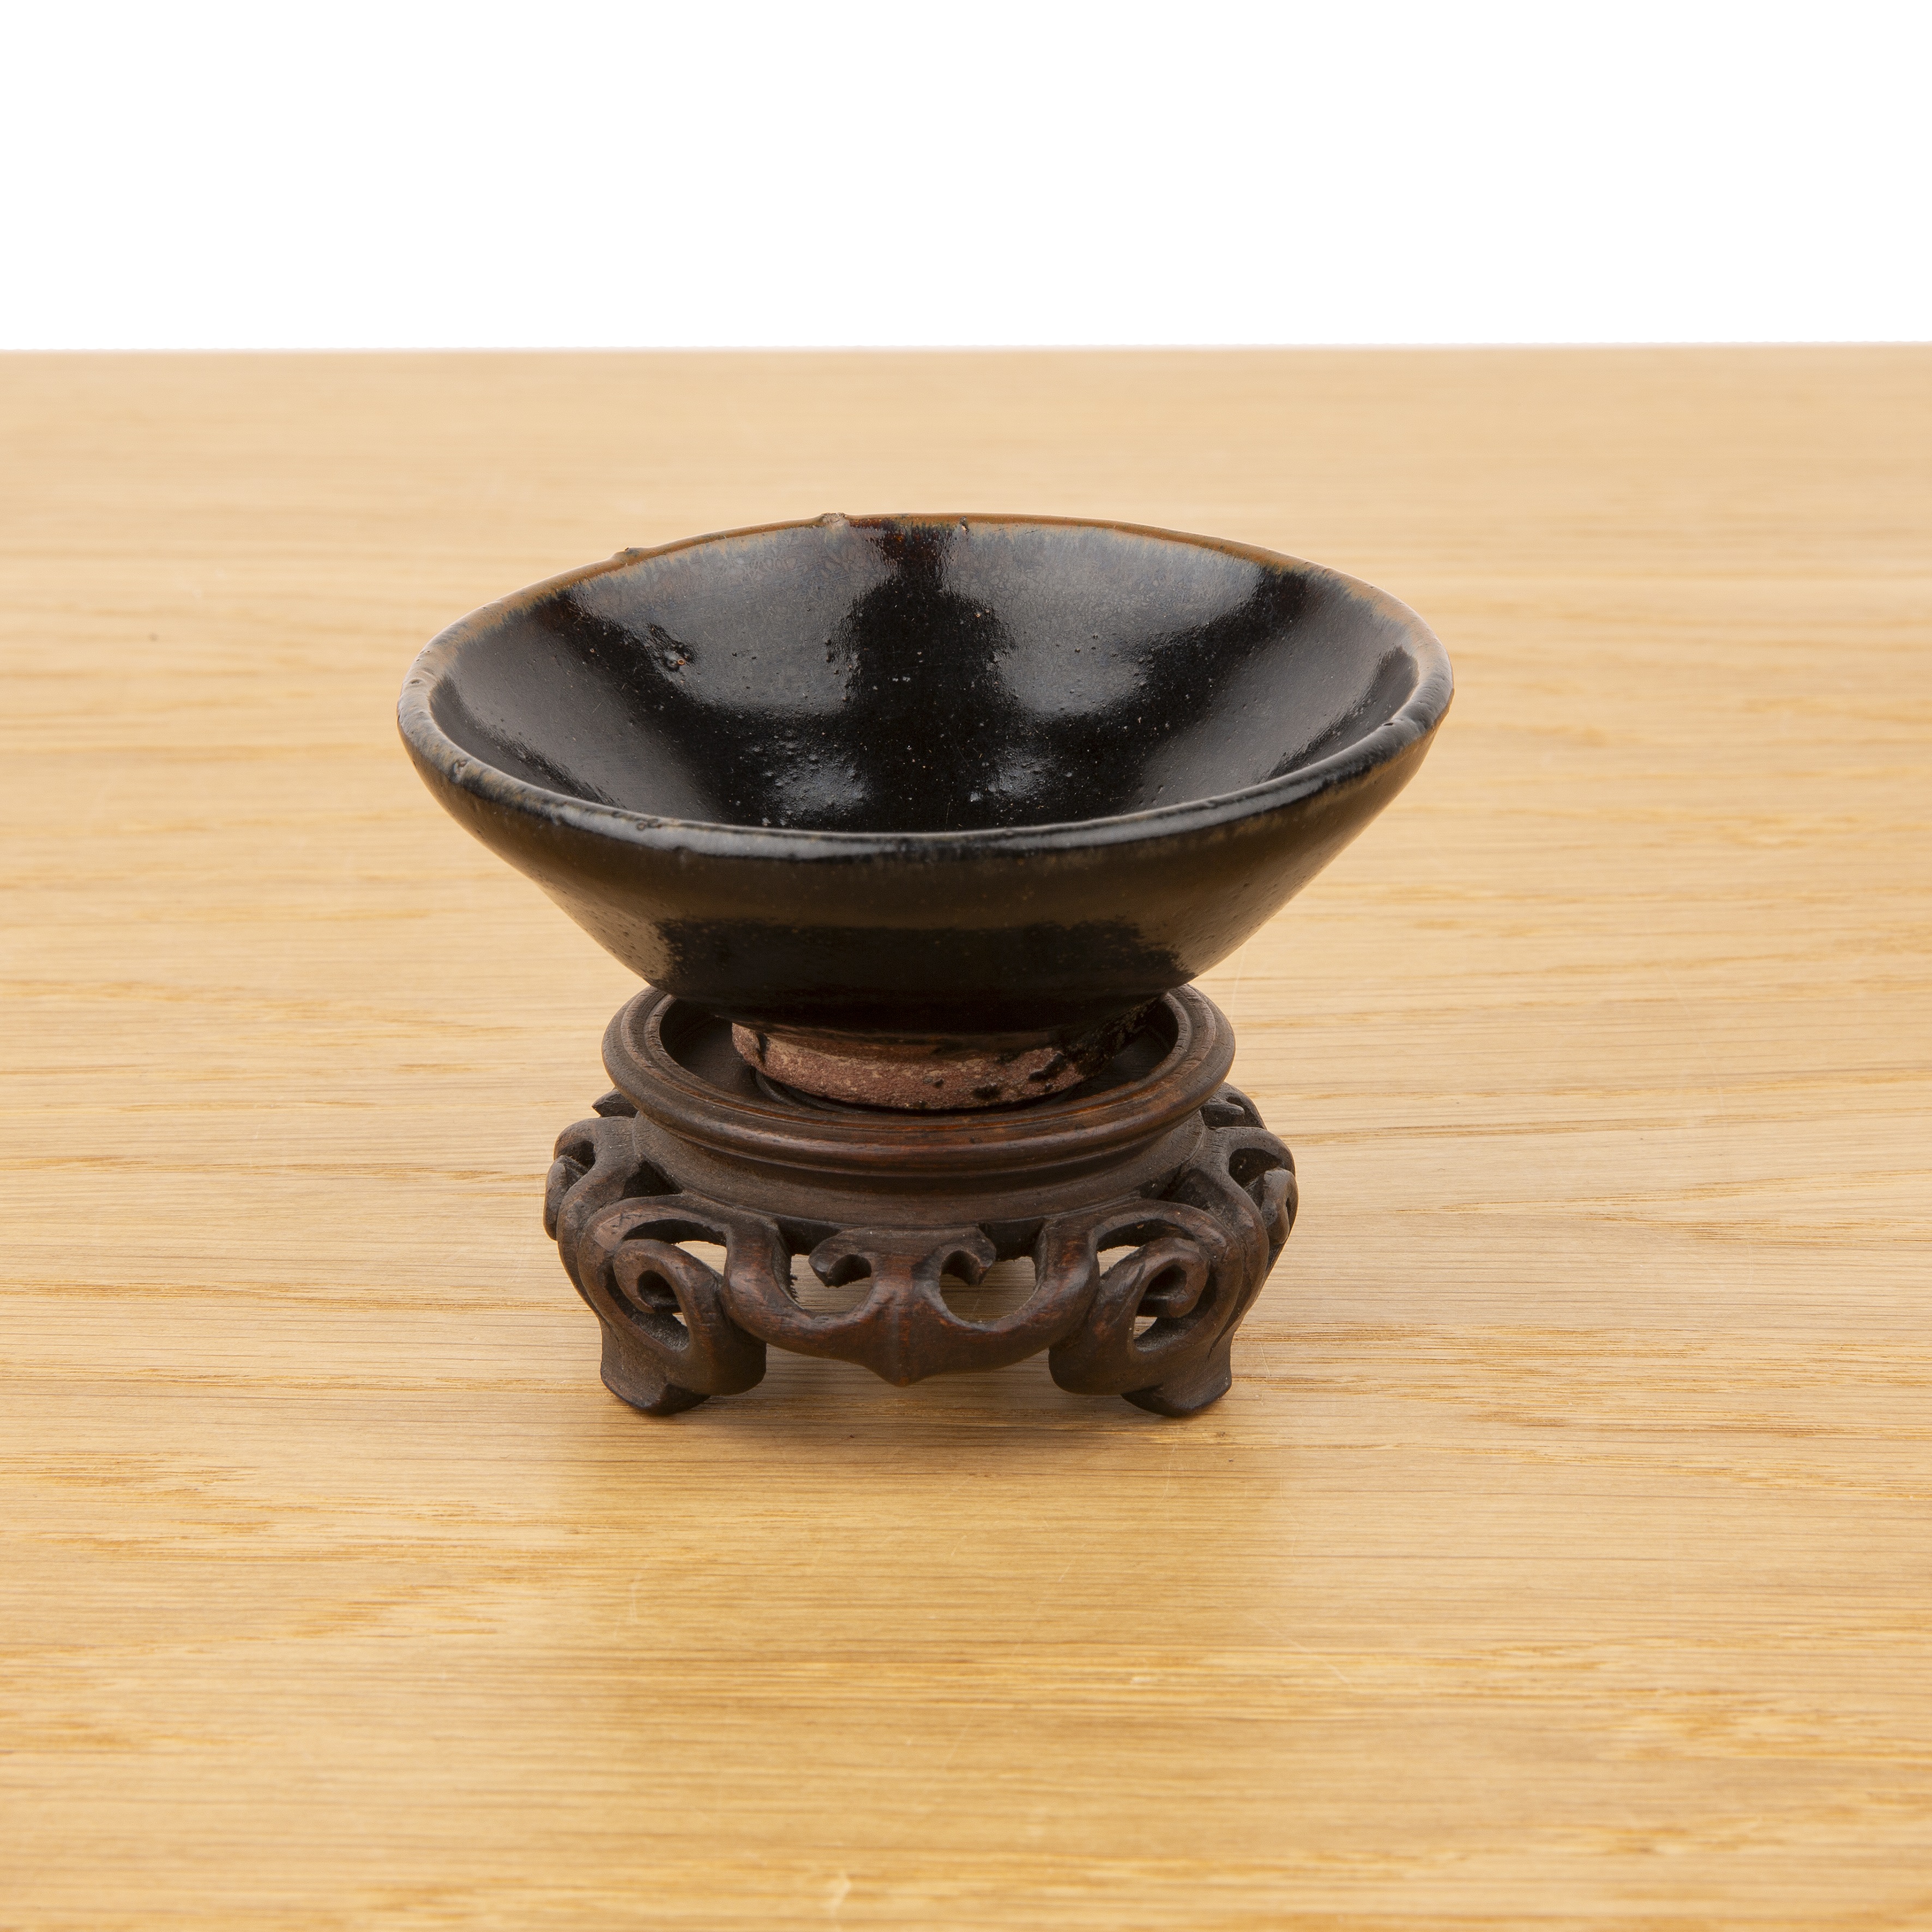 Tenmoku glaze small tea bowl Chinese of tapering plain form, with a small wooden stand, 9cm diameter